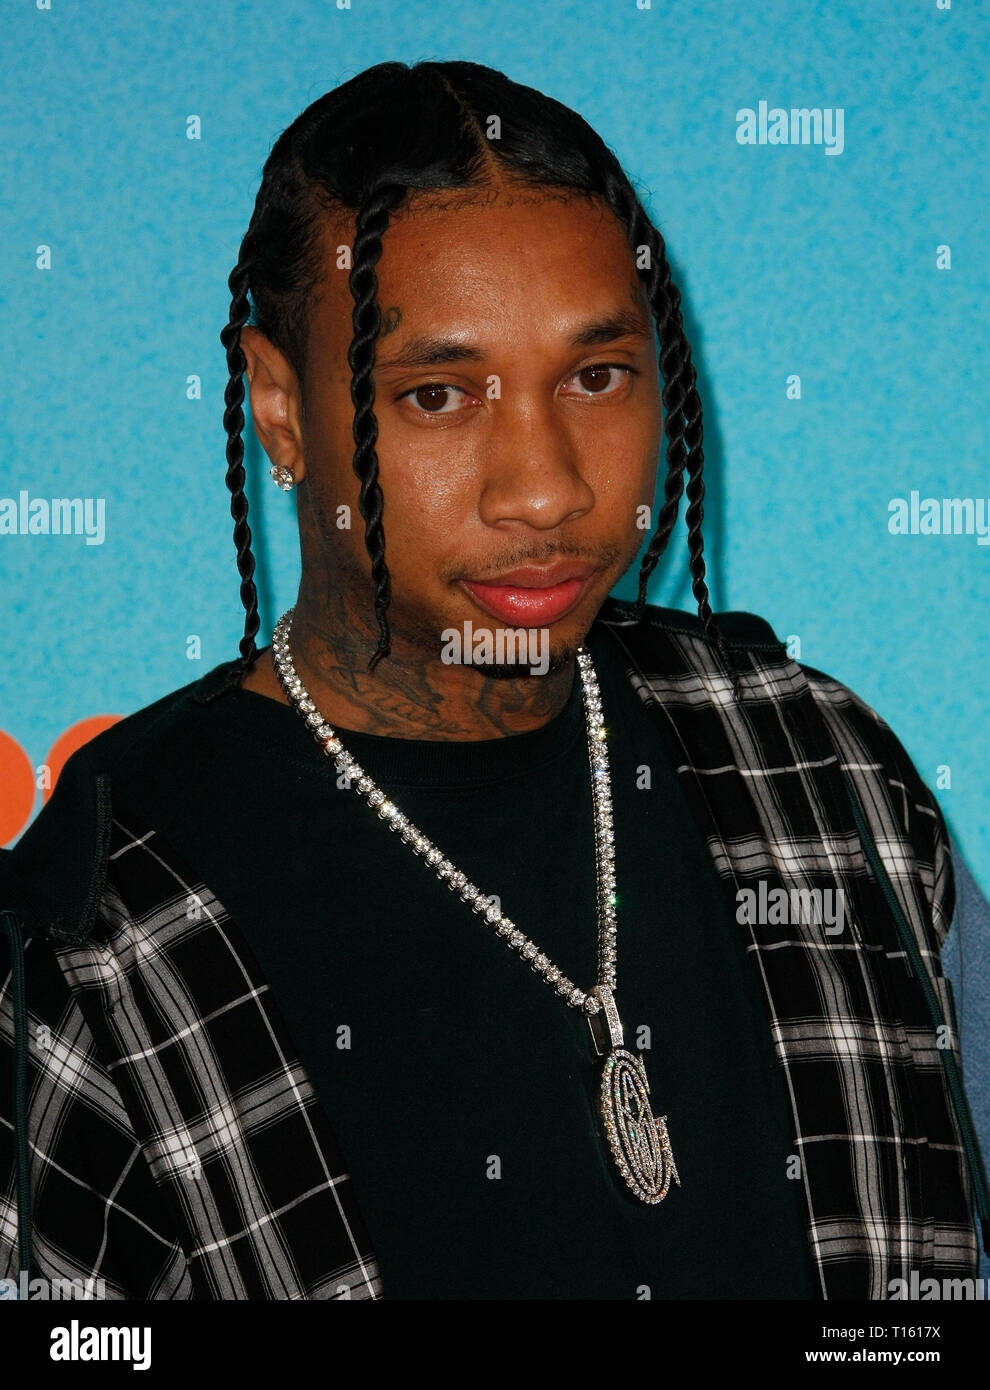 Los Angeles, USA. 23rd Mar, 2019. Tyga attends Nickelodeon's 2019 Kids' Choice Awards at Galen Center on March 23, 2019 in Los Angeles, California. Photo: CraSH for imageSPACE/MediaPunch Credit: MediaPunch Inc/Alamy Live News Stock Photo